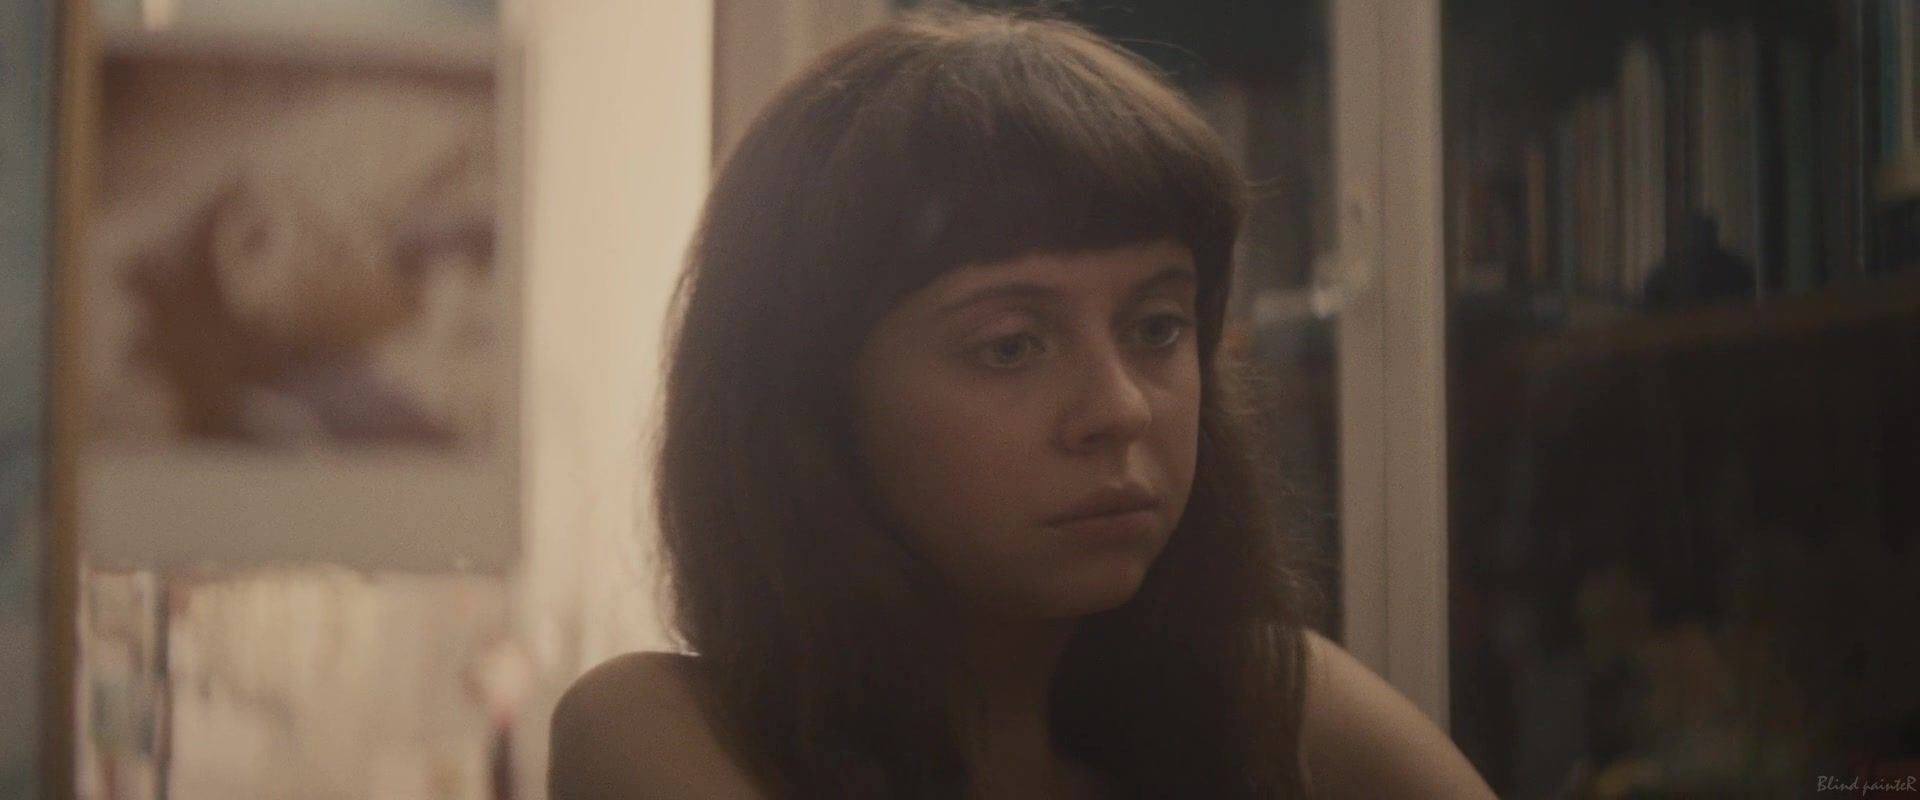 Small Boobs Bel Powley - The Diary Of A Teenage Girl (2015) Flexible